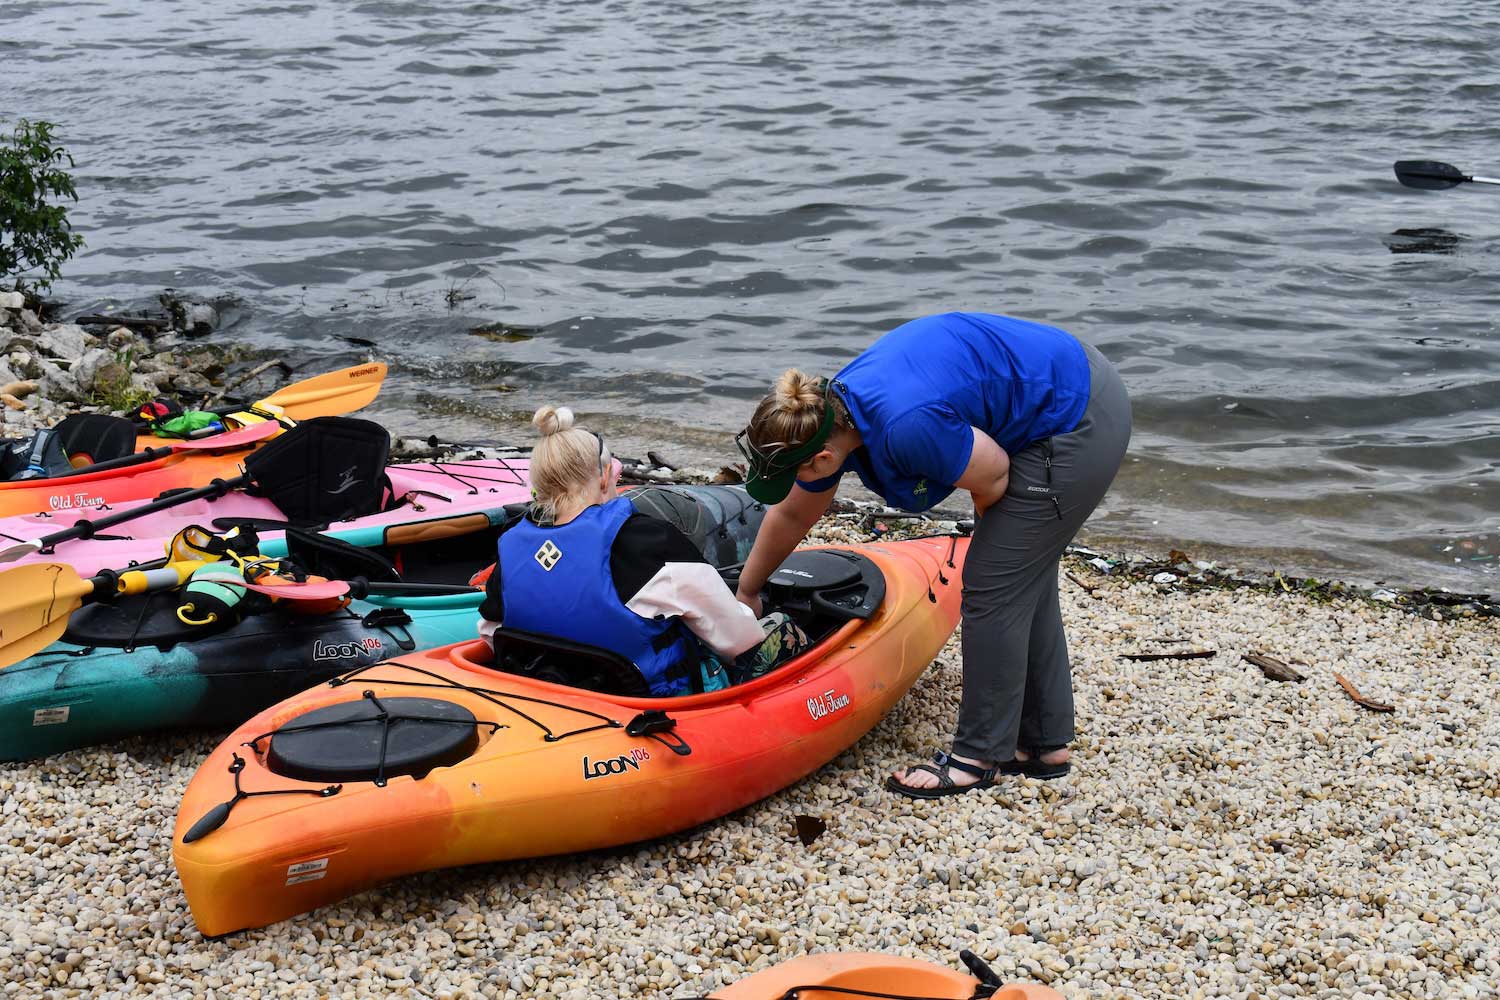 A person helping someone with a kayak with a group of kayaks situated at the water's edge.